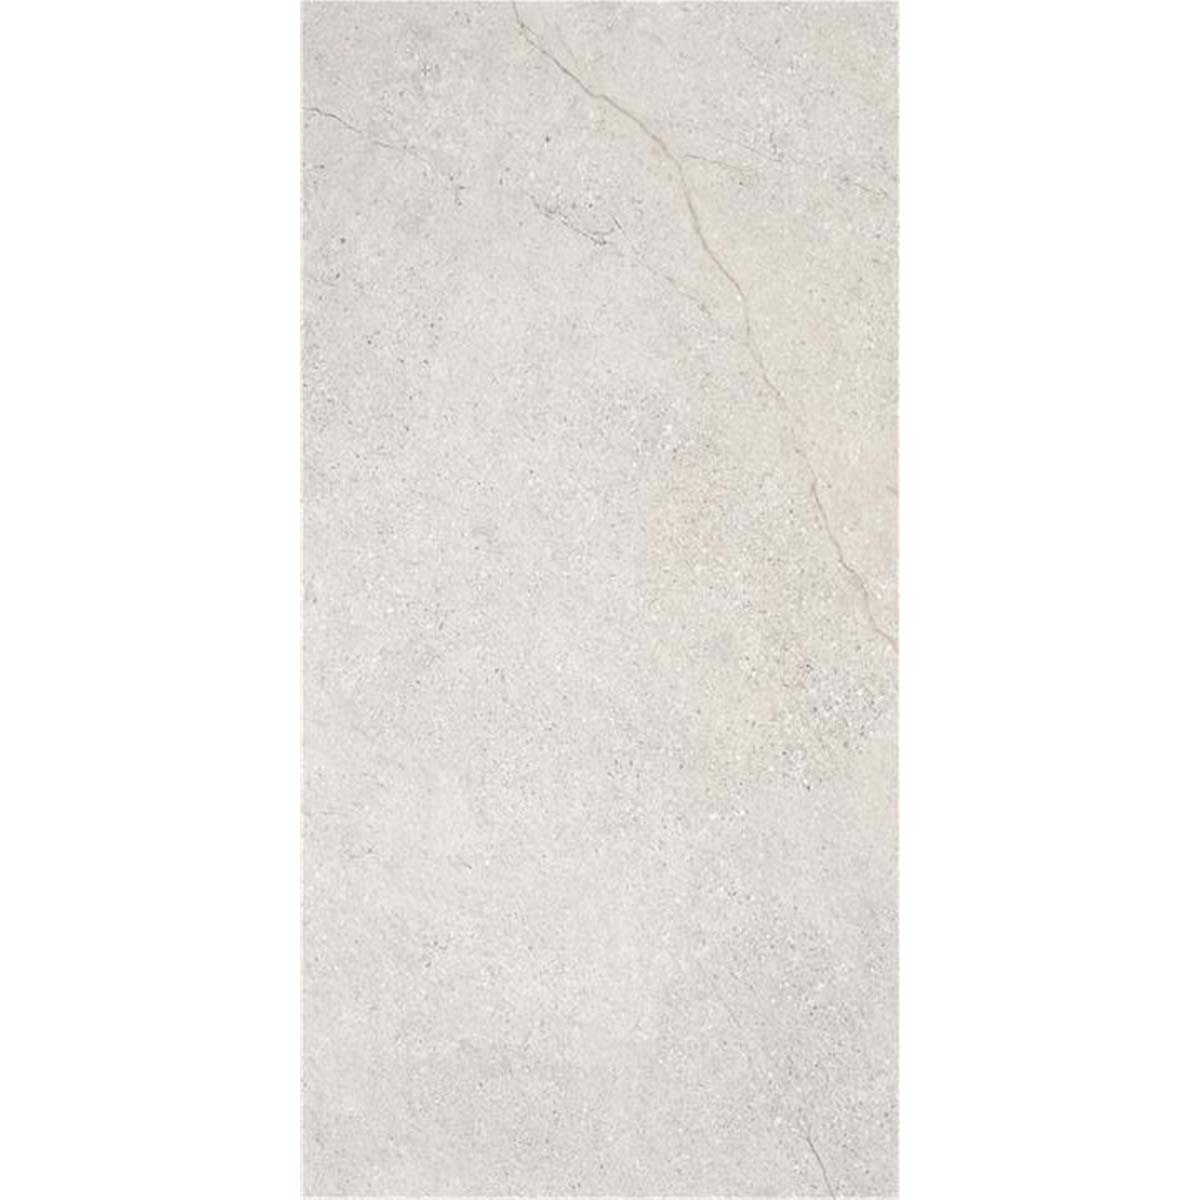 summary 20mm pearl stone effect outdoor porcelain tile 60x120cm deluxe bathrooms ireland